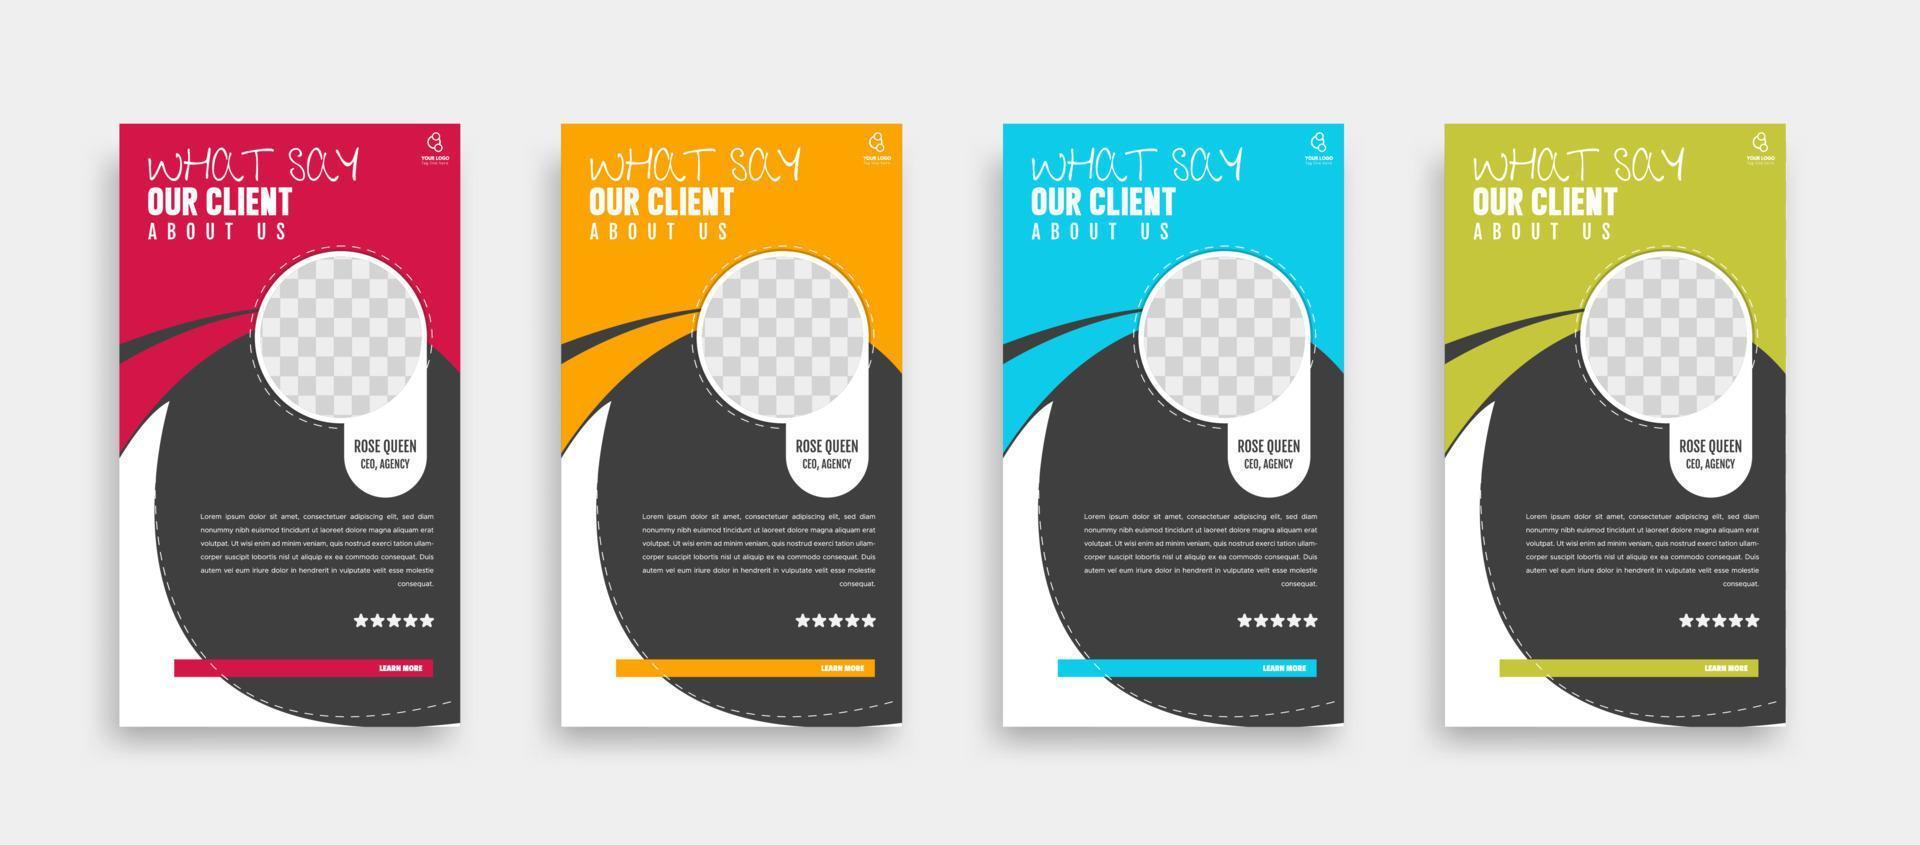 Modern and creative client testimonial social media post design. Customer service feedback review social media post or web banner with color variation template. vector